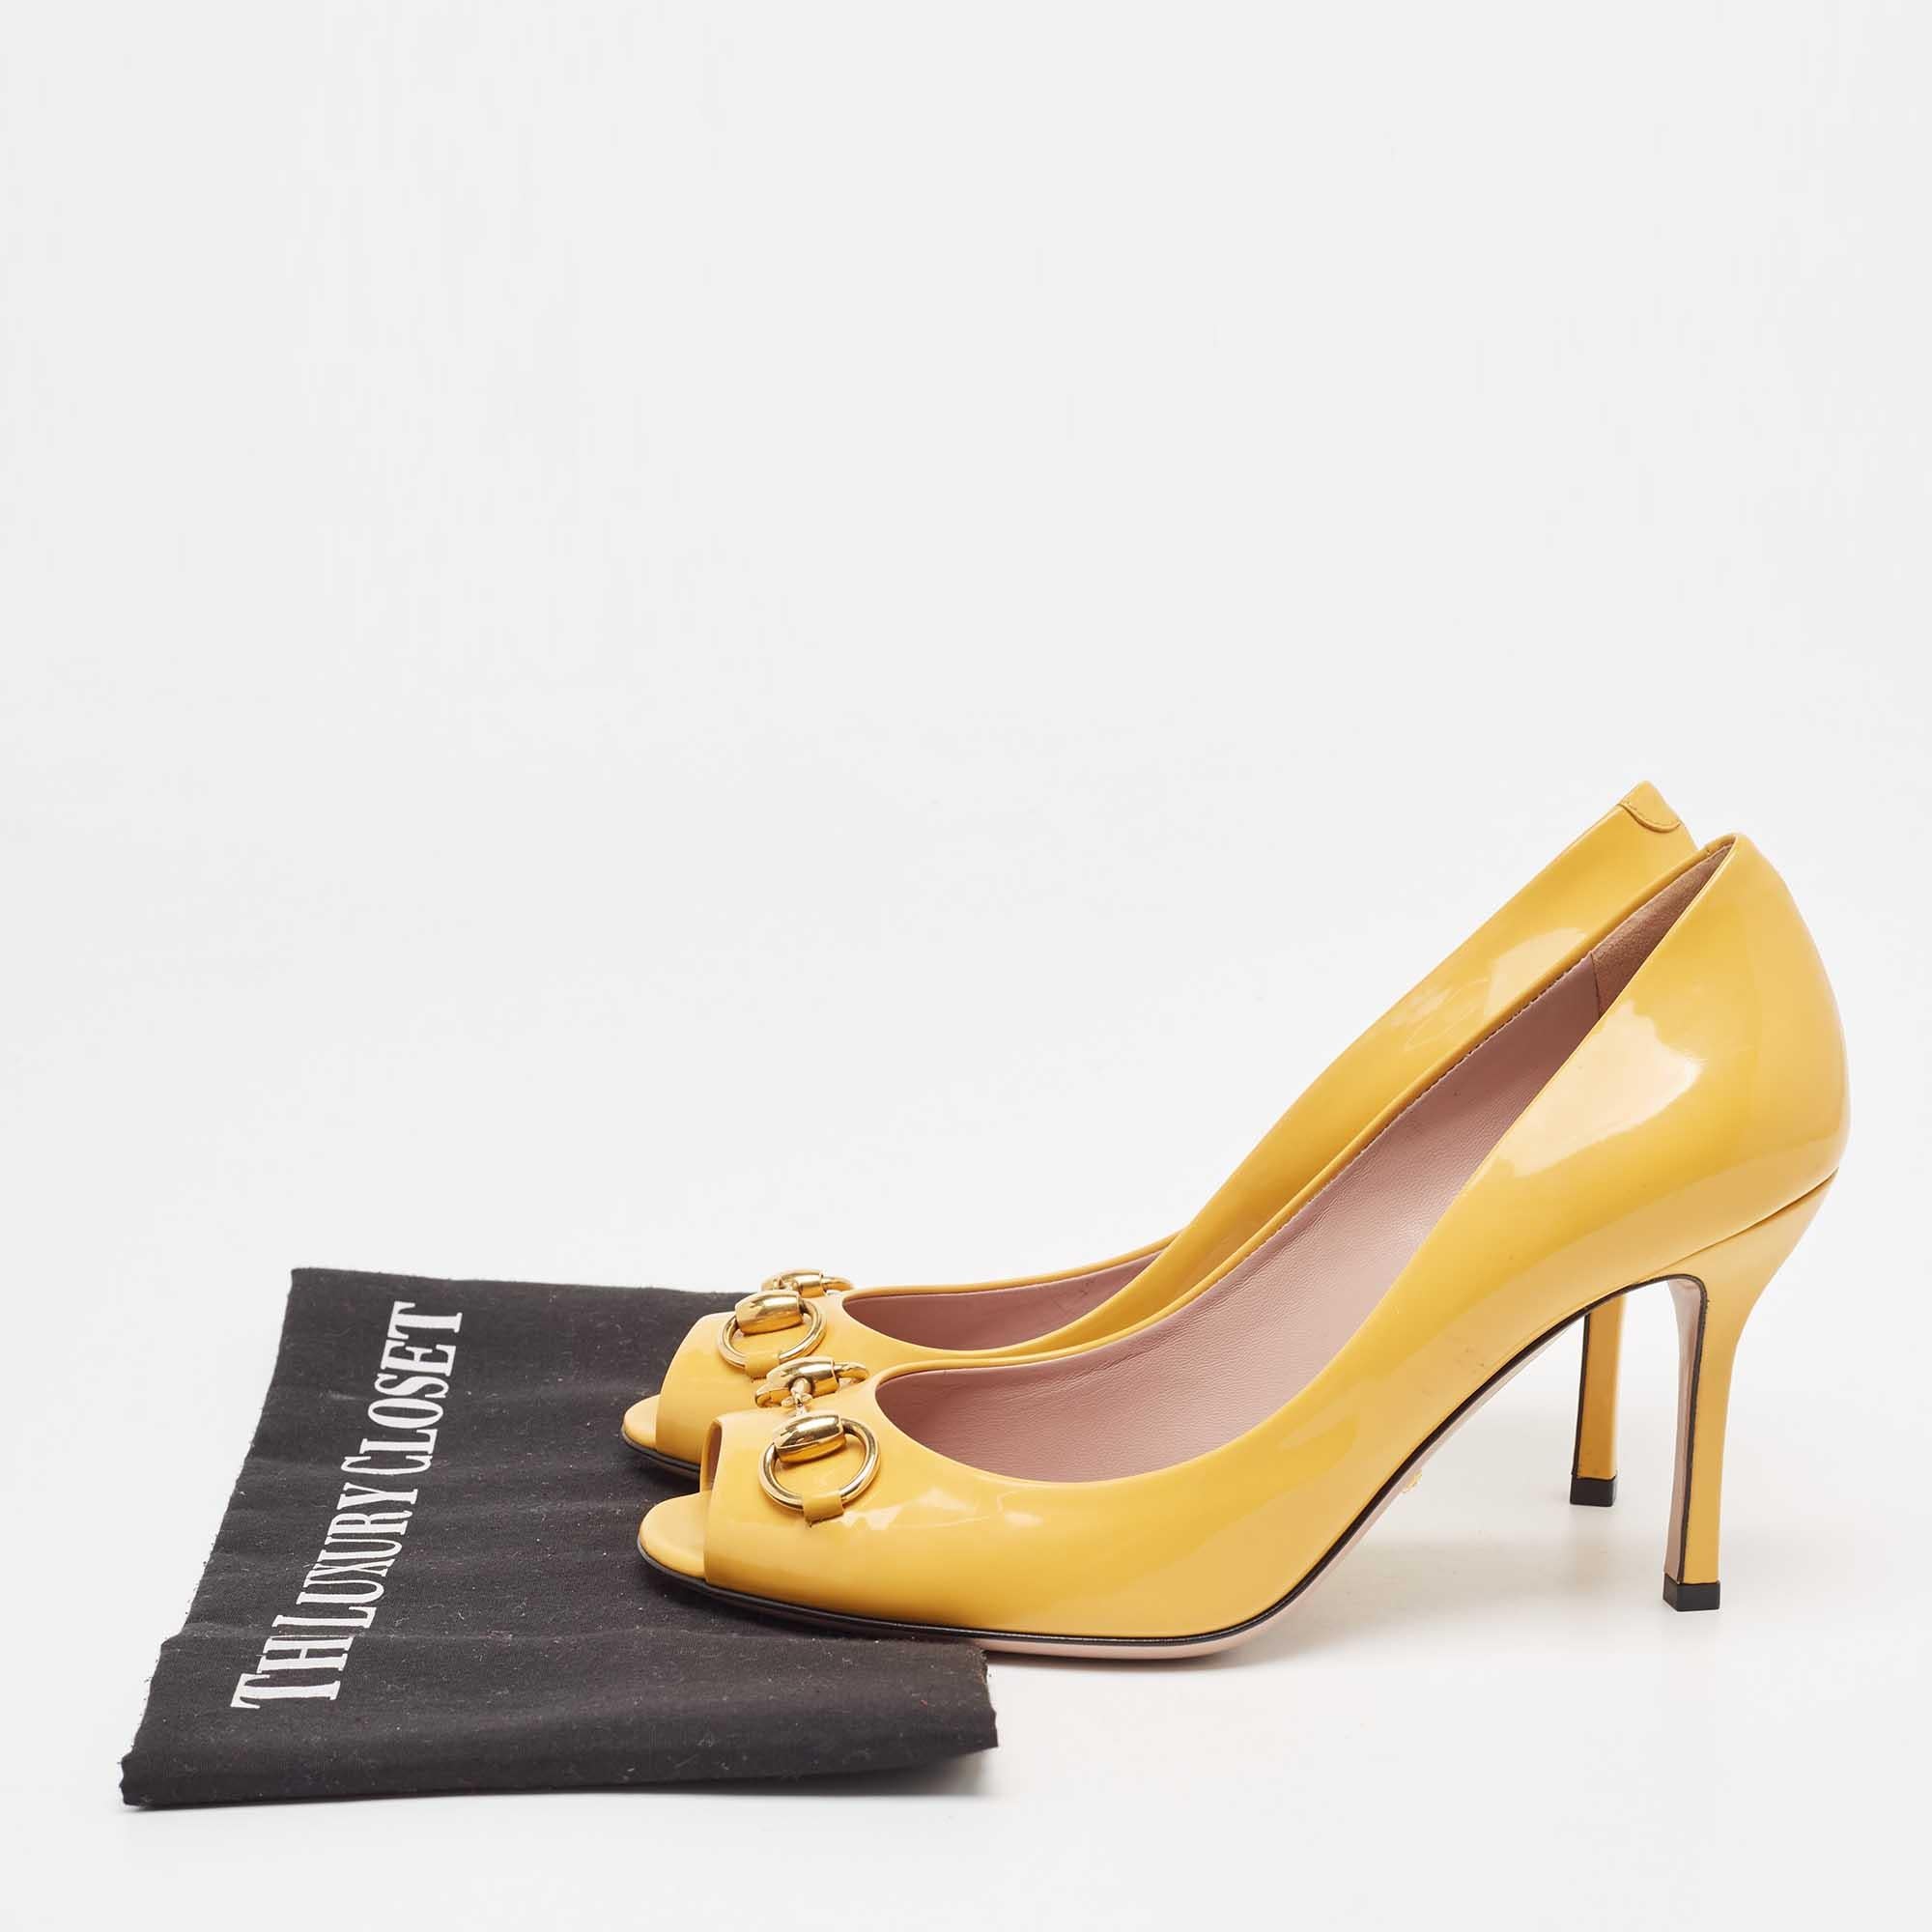 Gucci Yellow Patent Leather Horsebit Peep Toe Pumps Size 38 For Sale 4